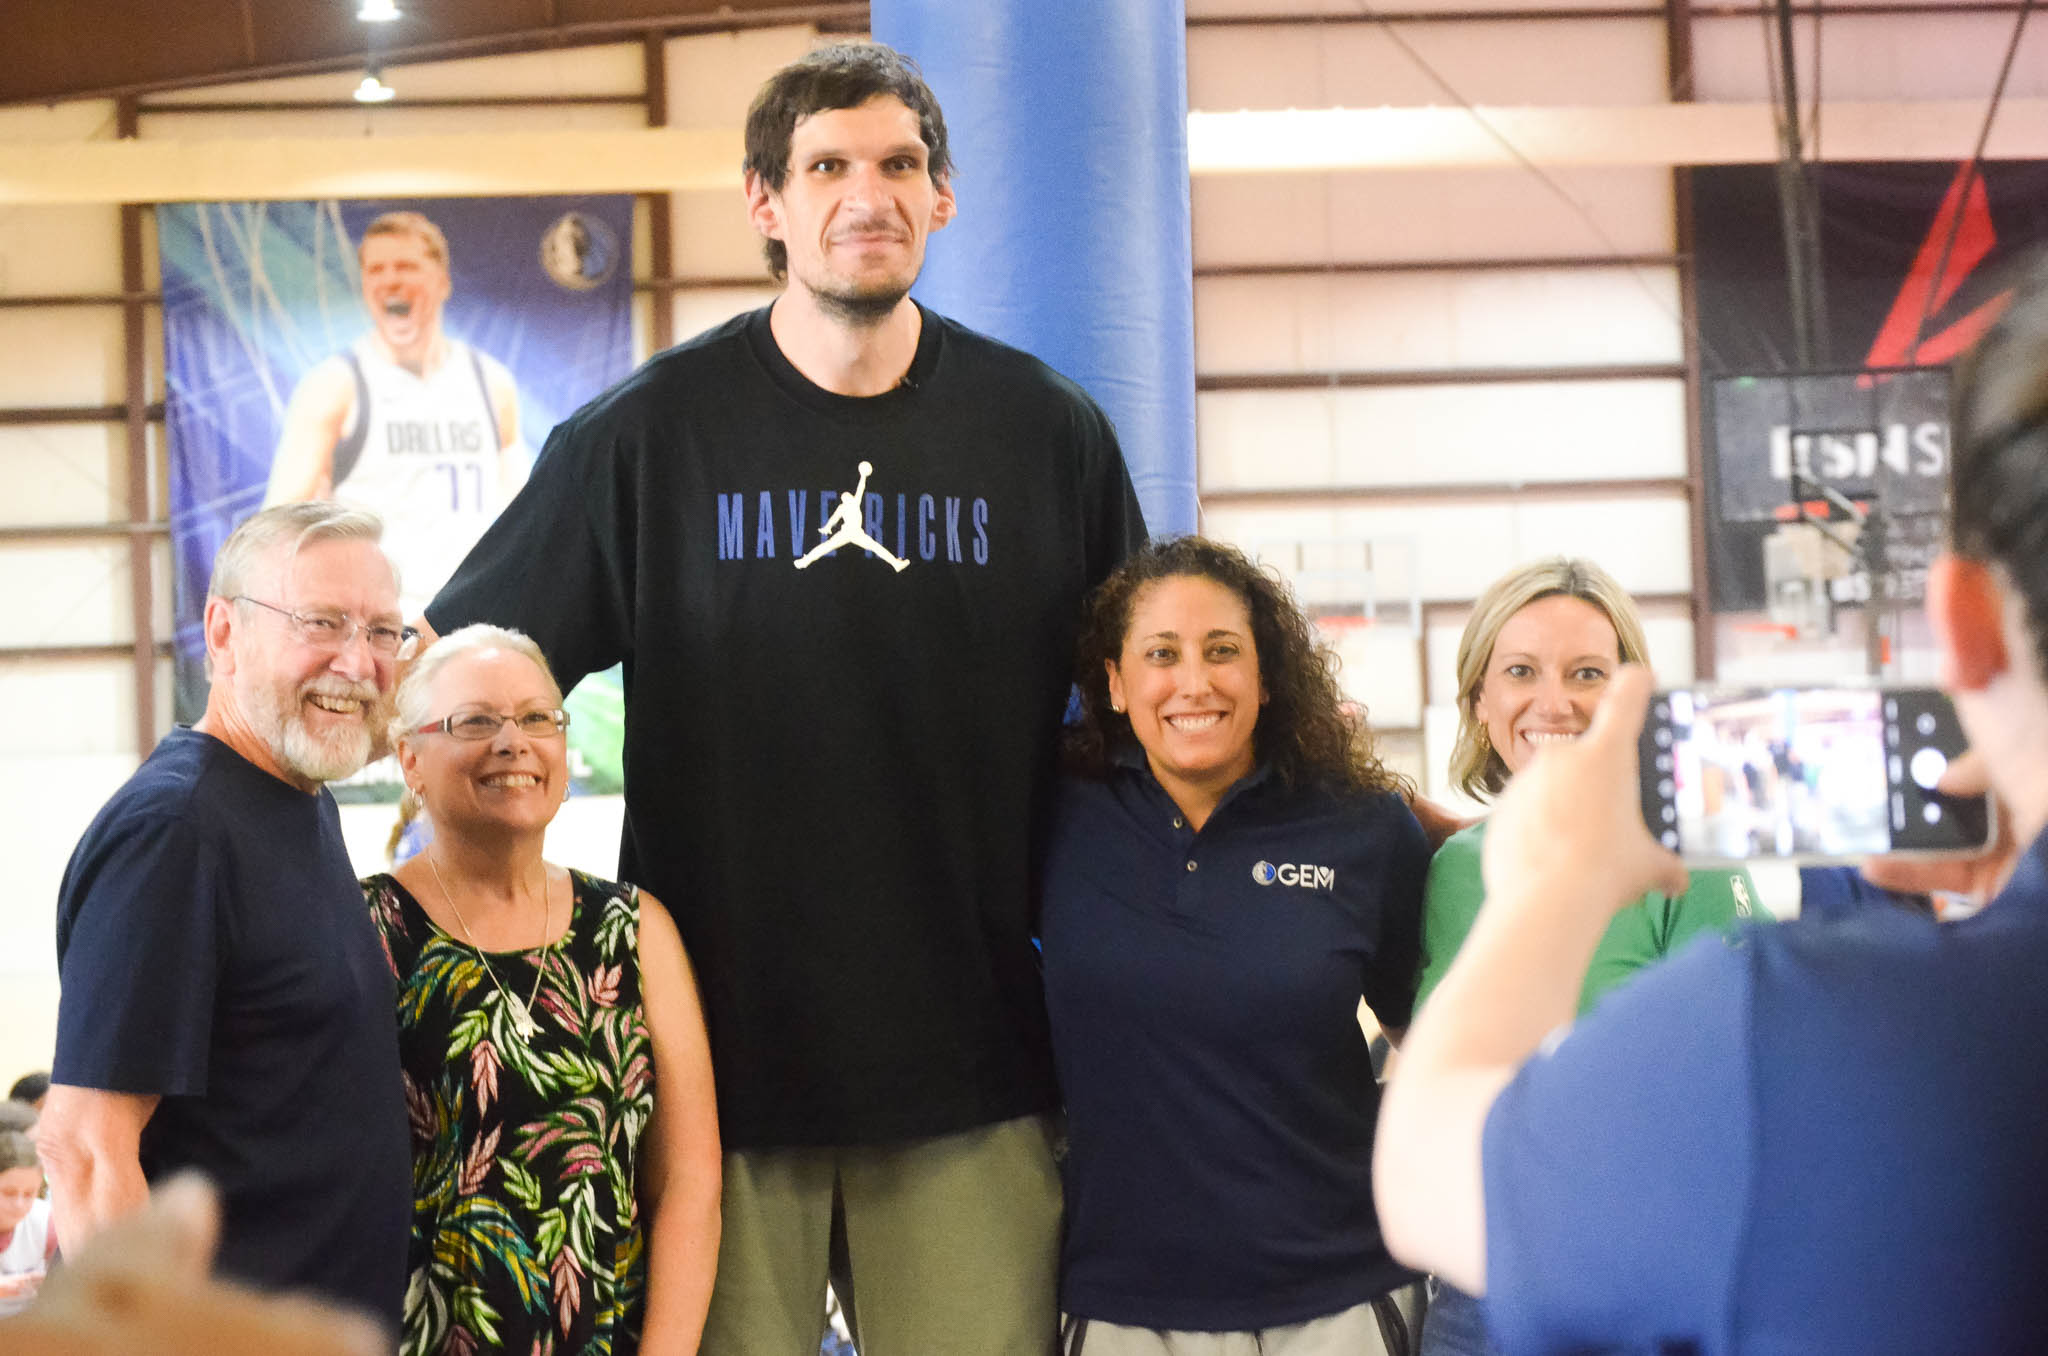 Boban The Great - D Magazine